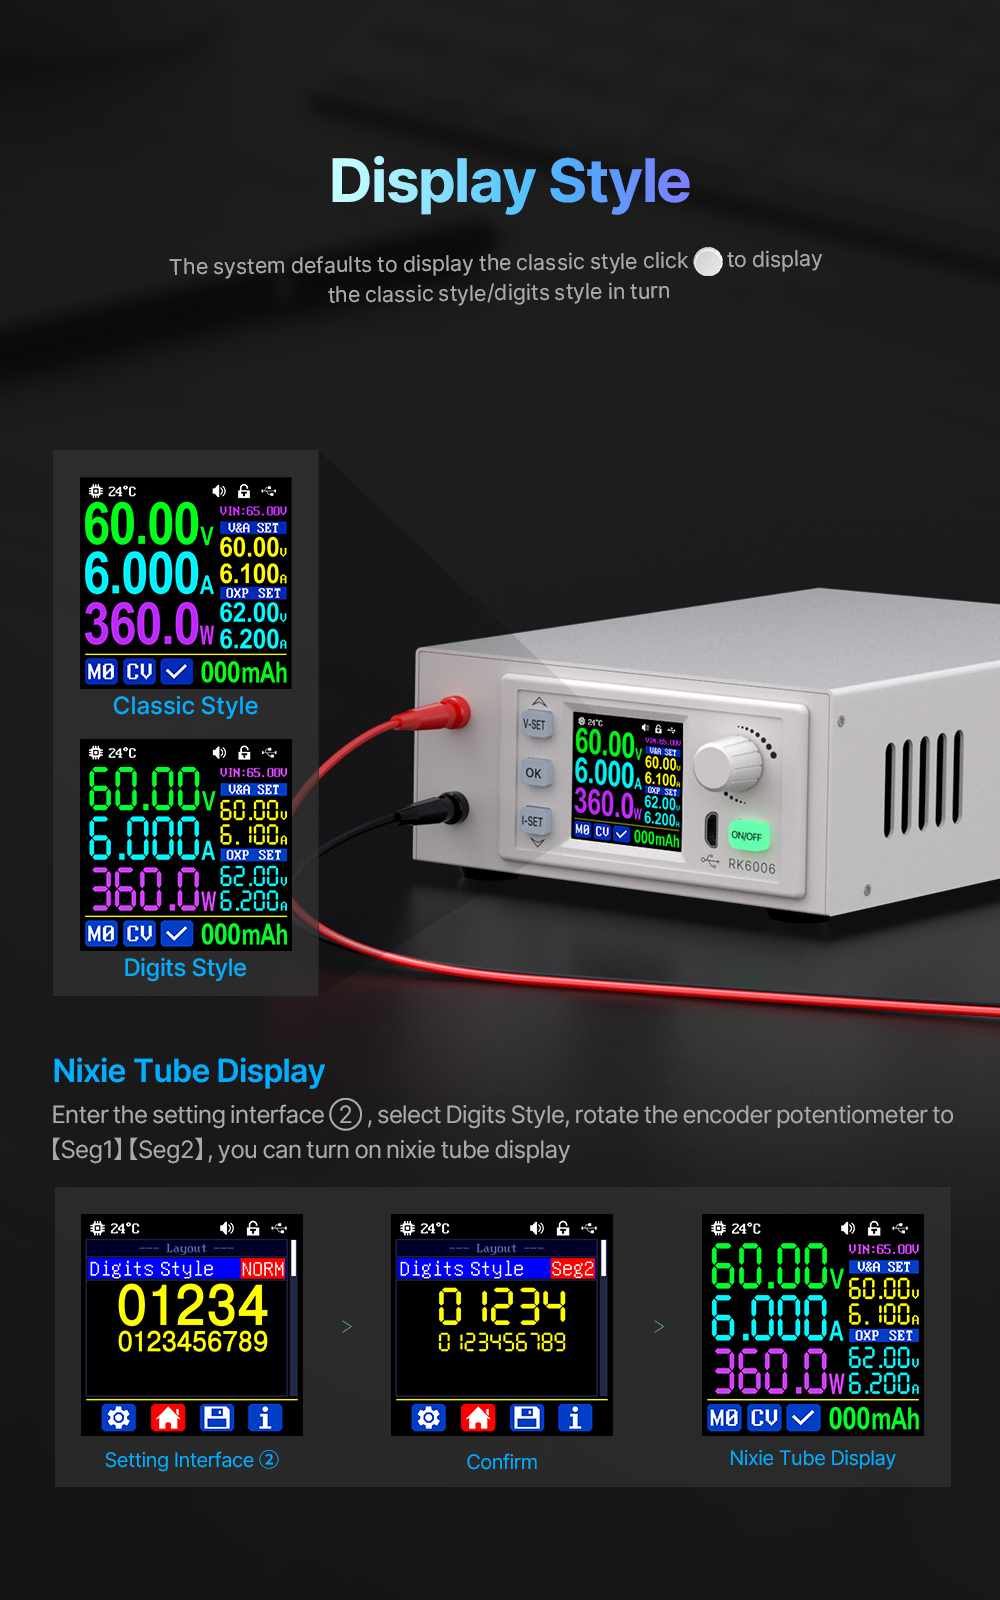 RIDEN RK6006-C Digital Power Supply High Precision 60V 6A with Overvoltage Protection and HD Display for Efficient Power Control